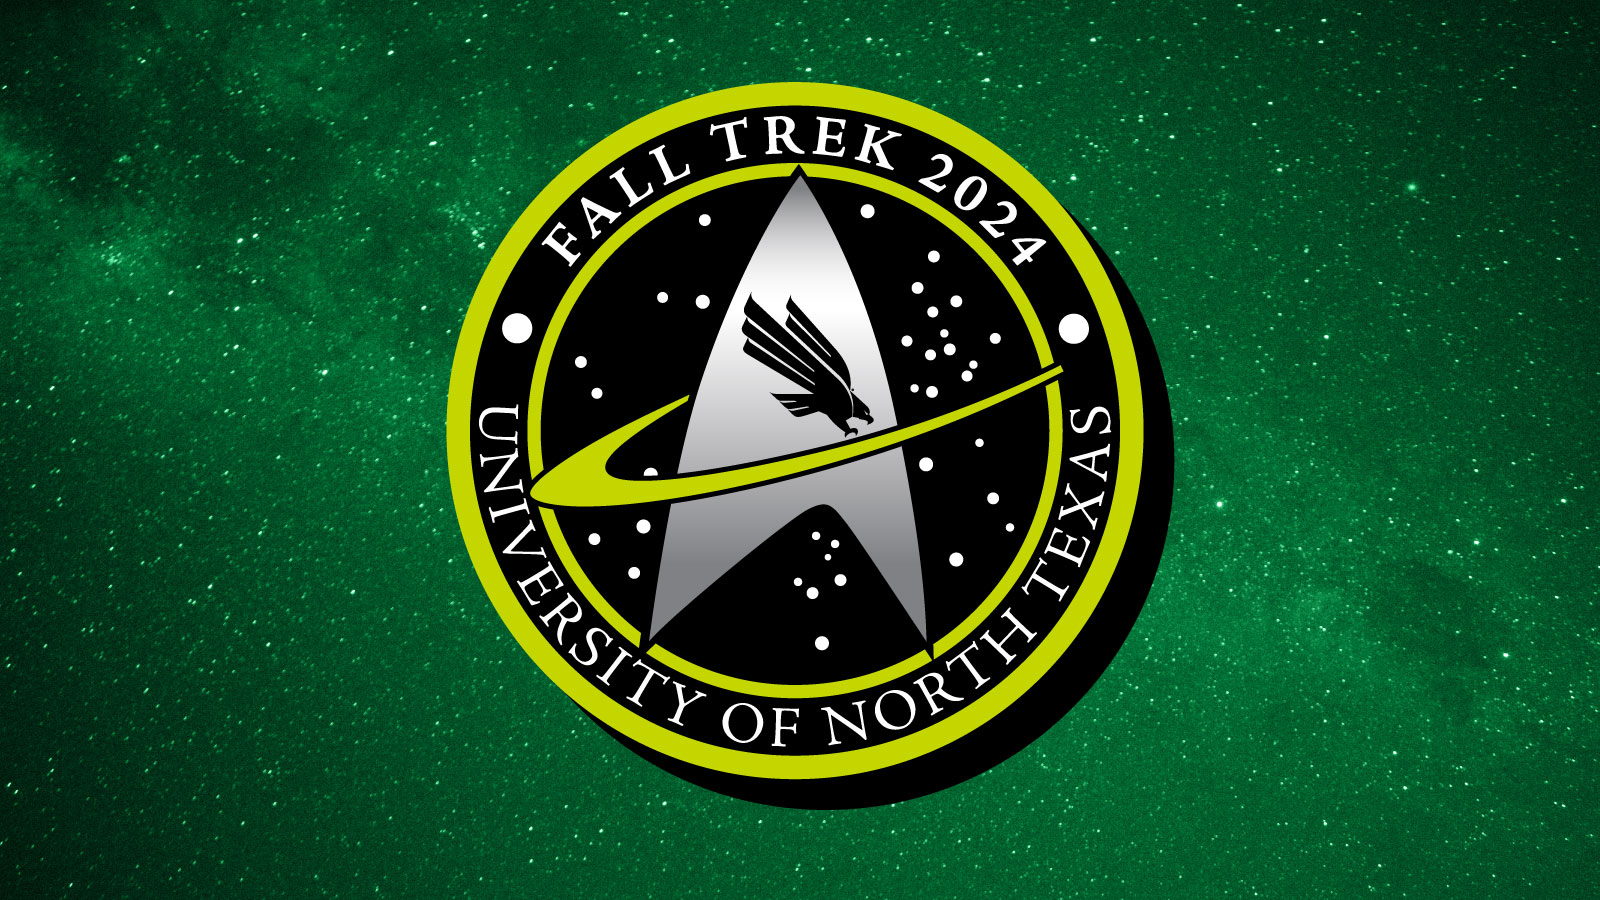 Green Banner with a logo that says "Fall Trek 2024: University of North Texas"